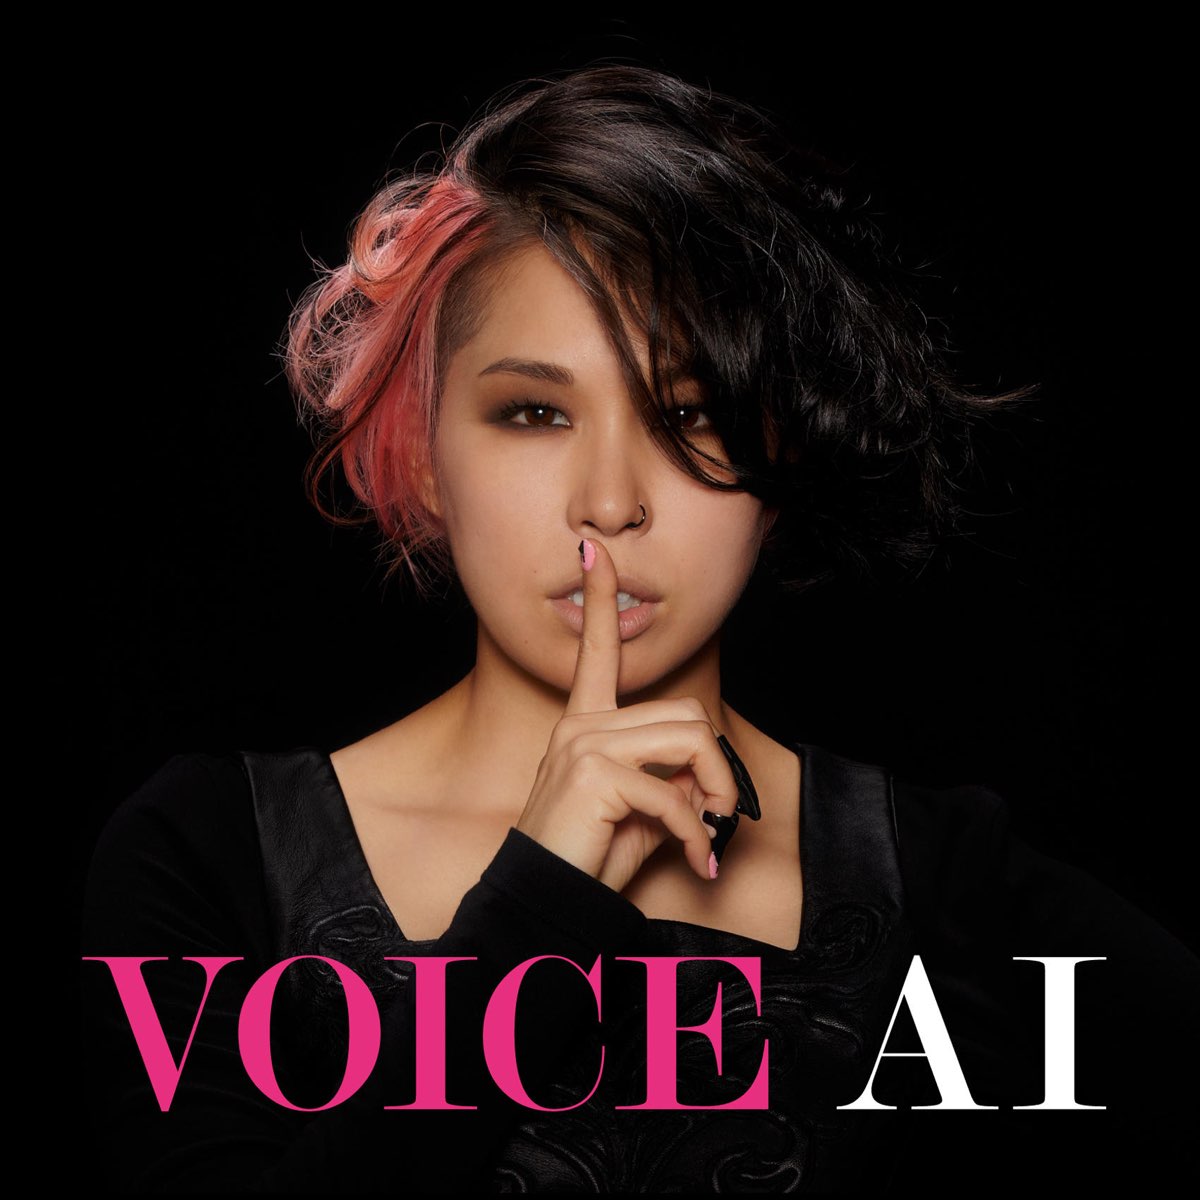 Ai voice characters. Обложка the Voice. Voice ai. The Voices. Новая обложка Voice.